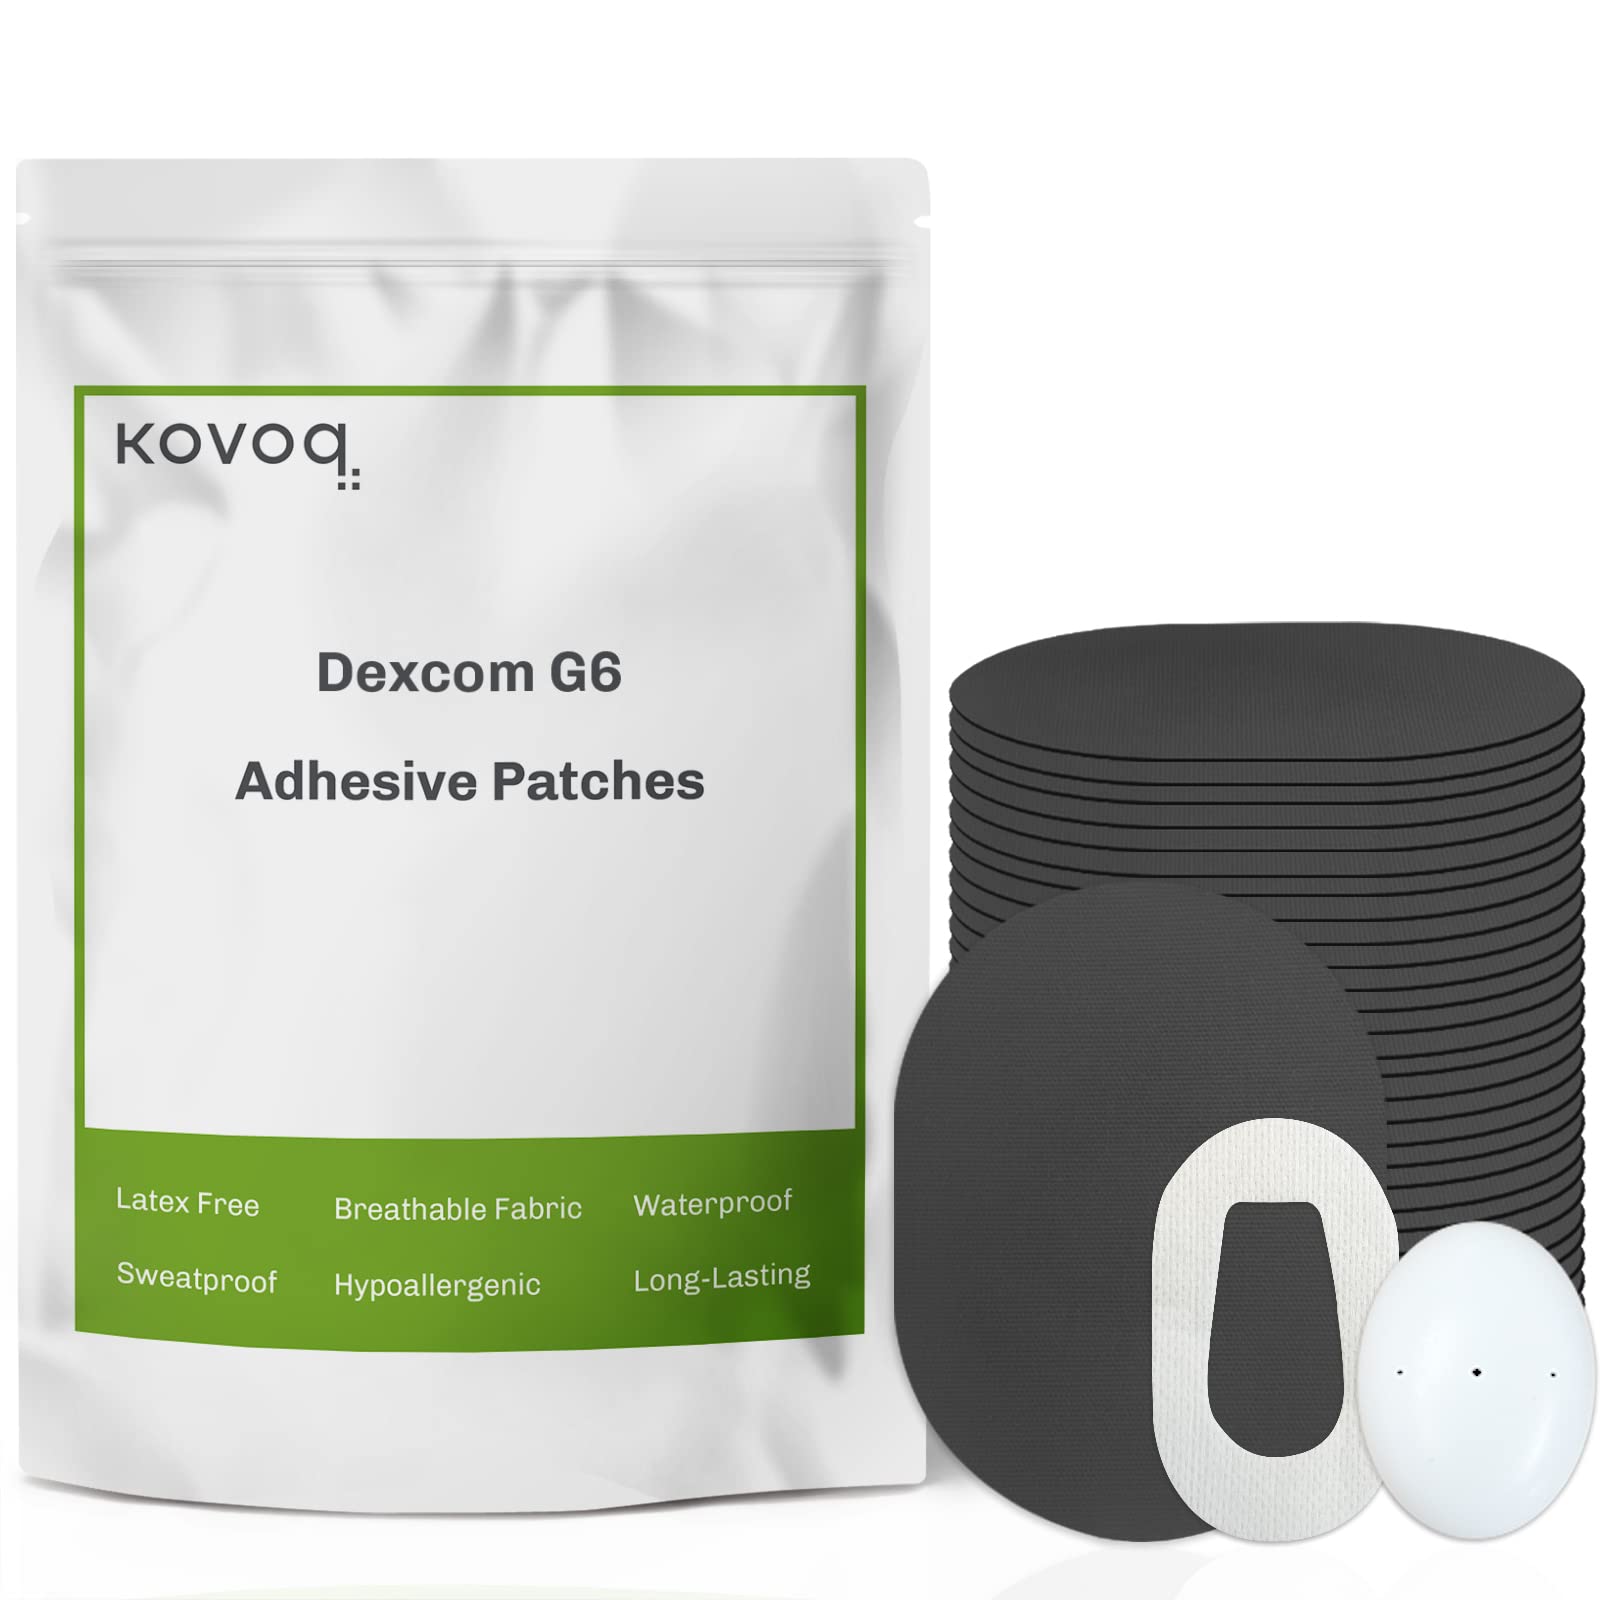 Amolyfe Waterproof Dexcom G6 Adhesive Patches, 30-Pack Sensor Covers for  Dexcom G6 + 2 Reusable Caps as Sensor Shield, Truly Bump-Proof, 10-14 Days